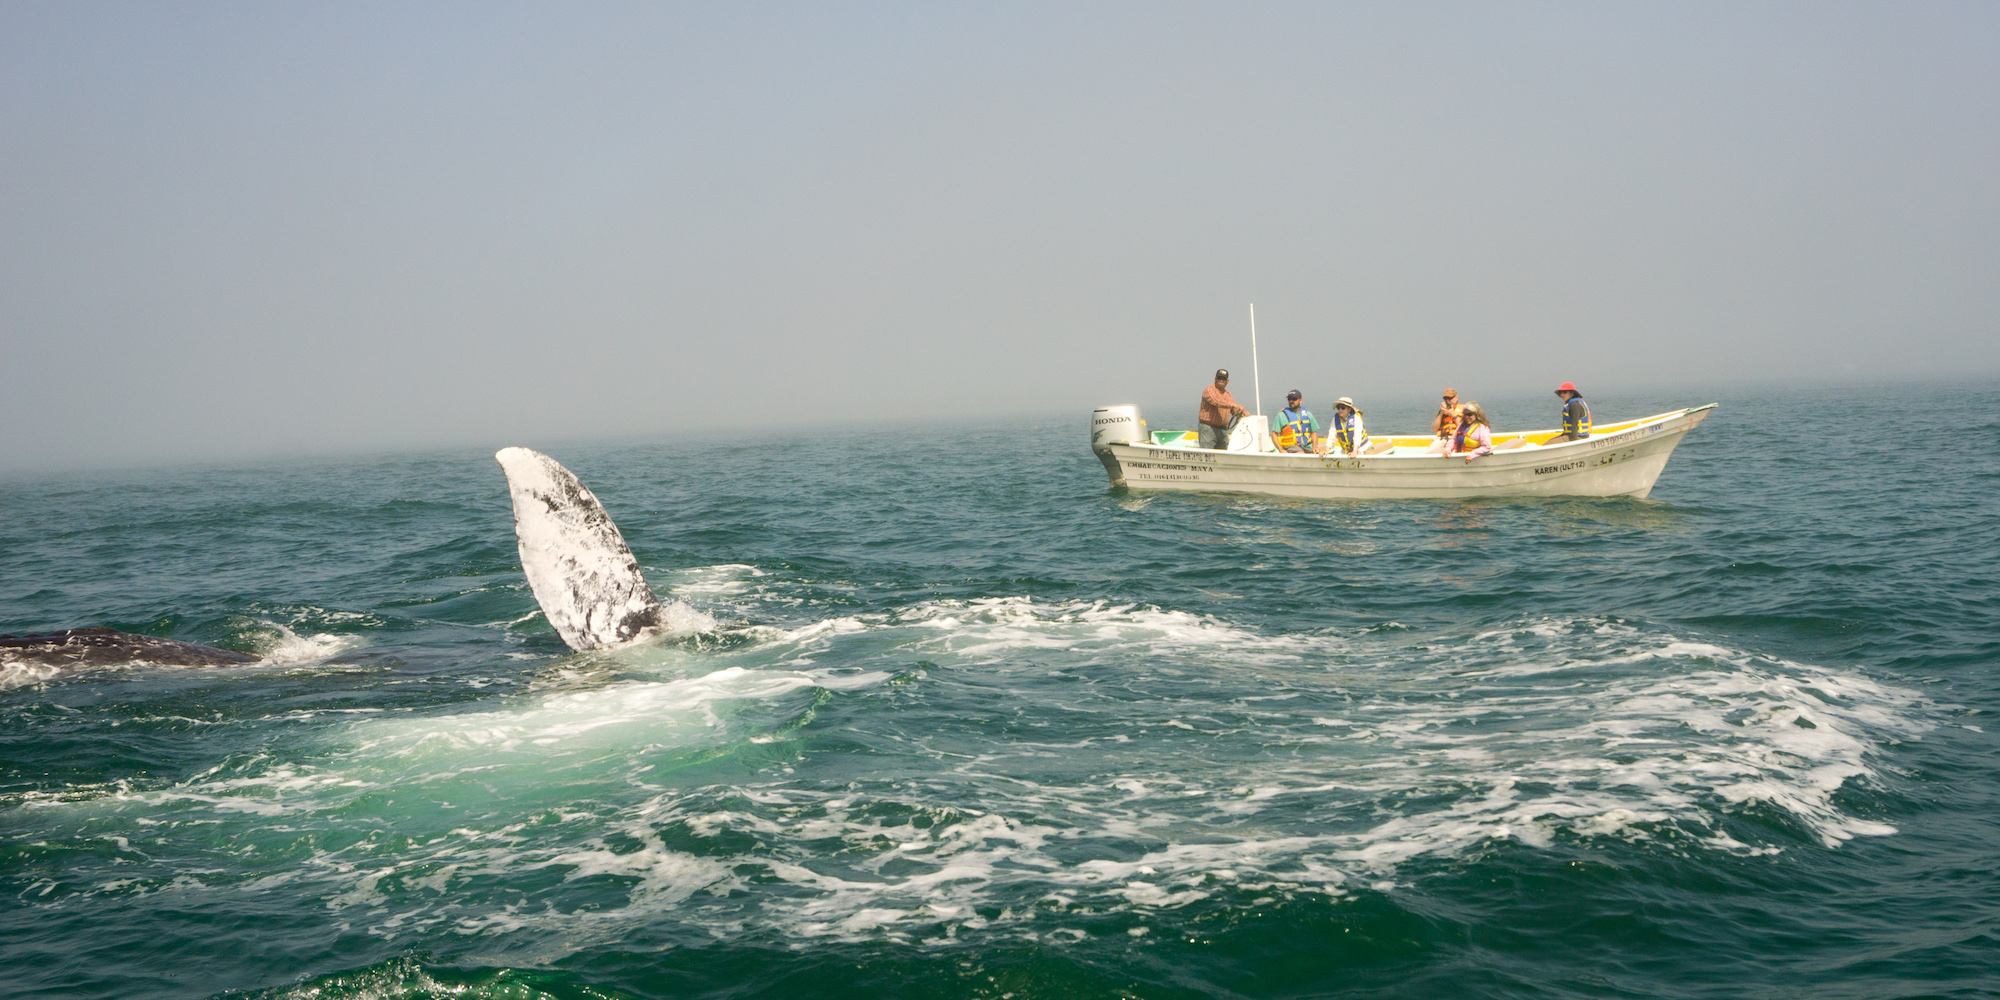 A group of people whale watching on a boat from a respectful distance in Baja California Sur